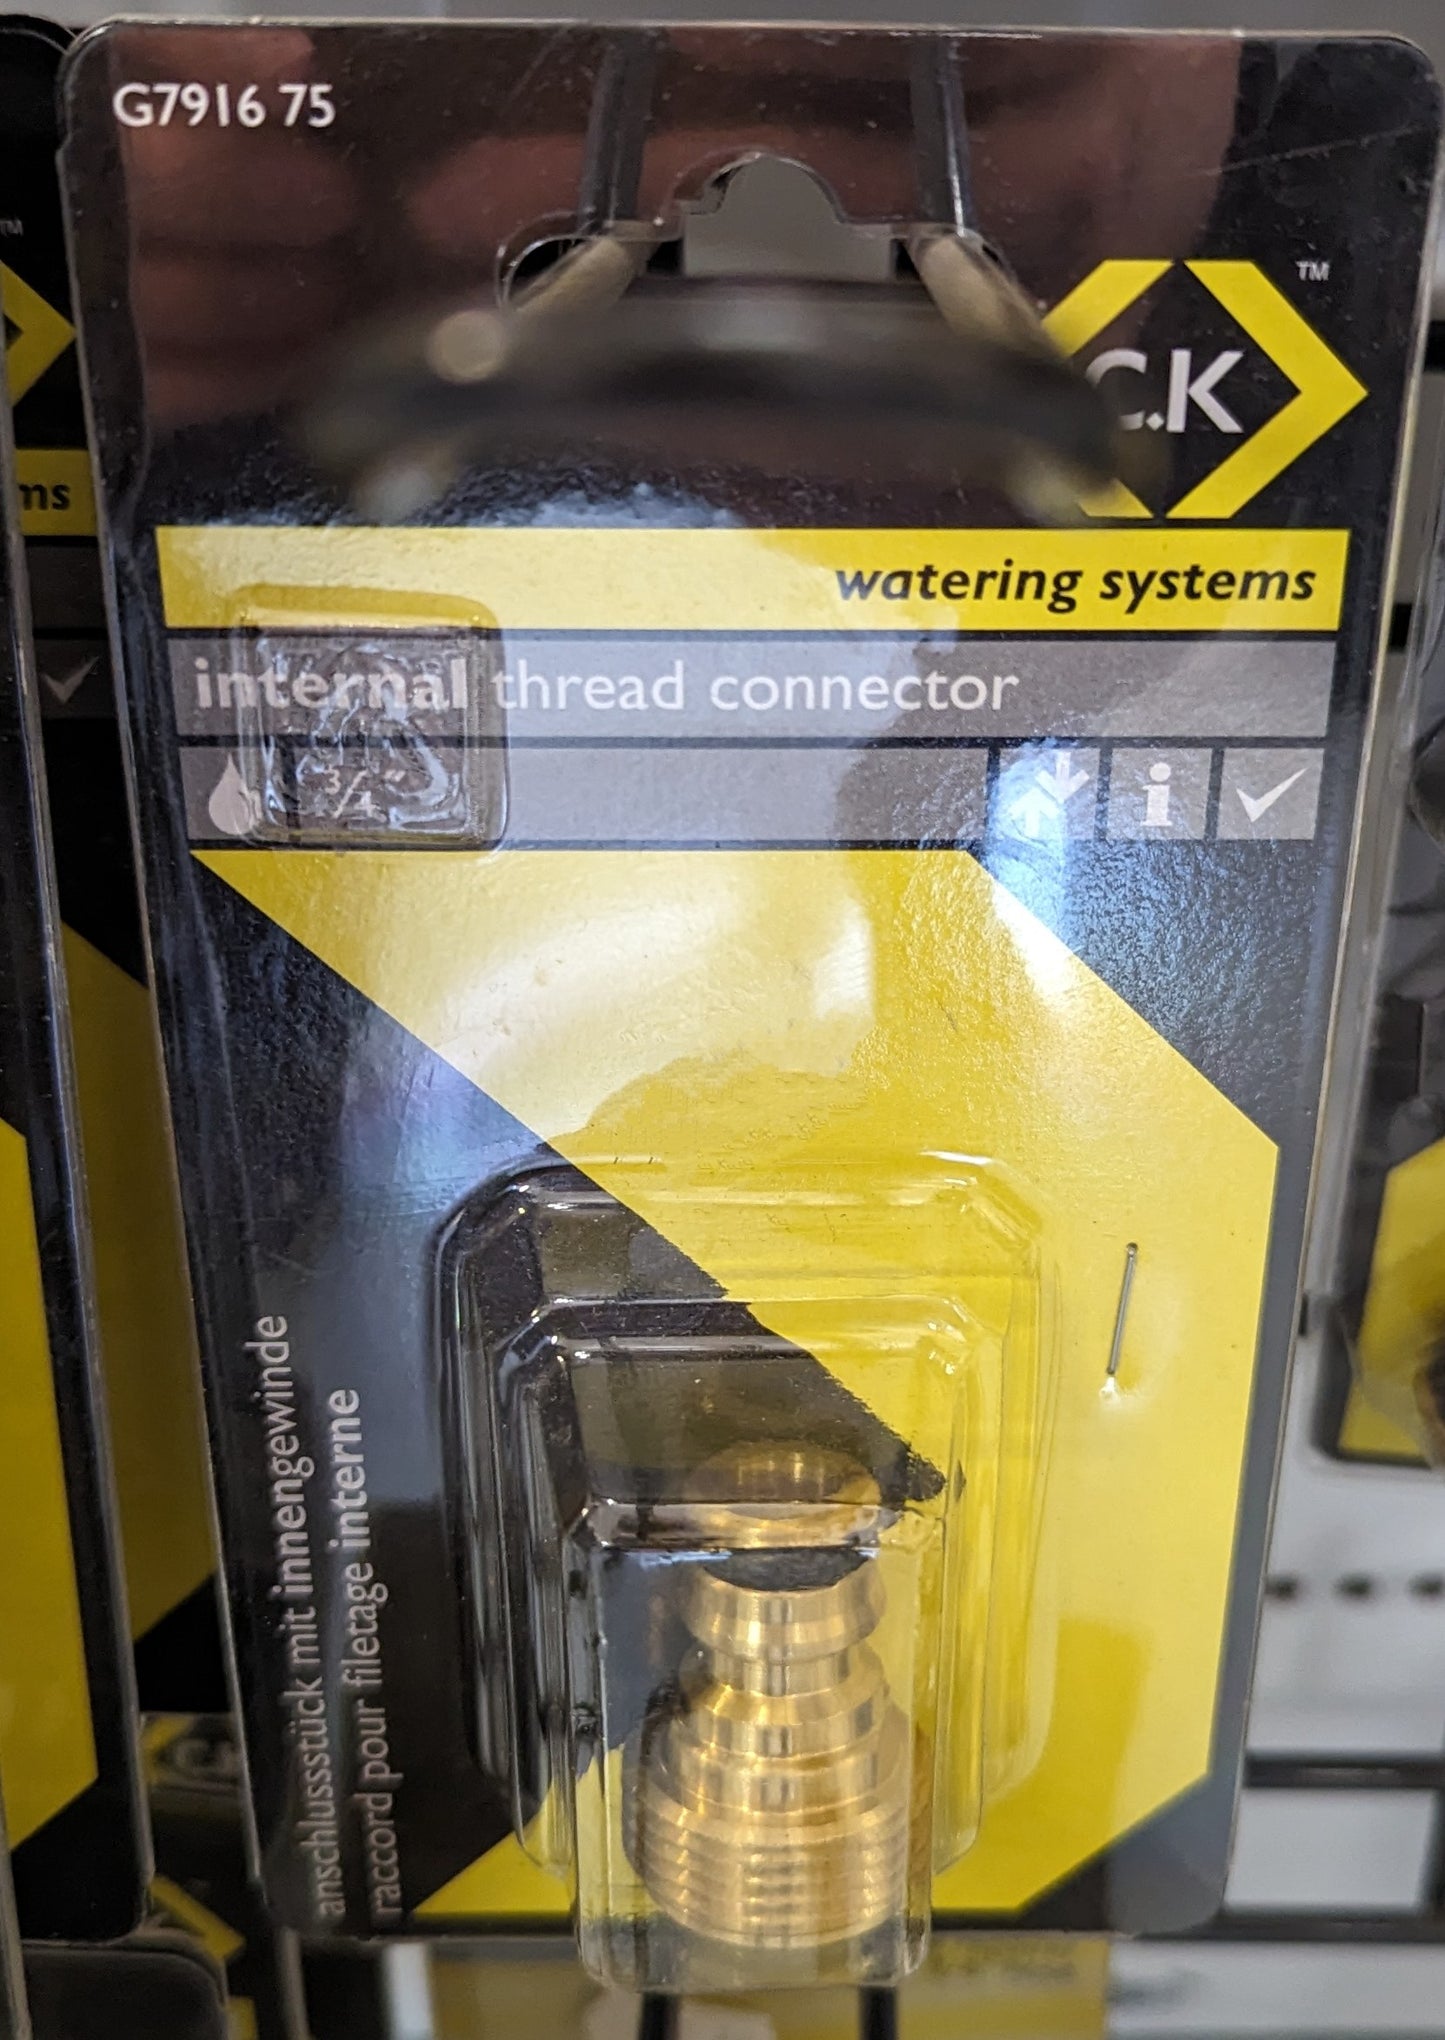 CK watering Systems internal thread connector